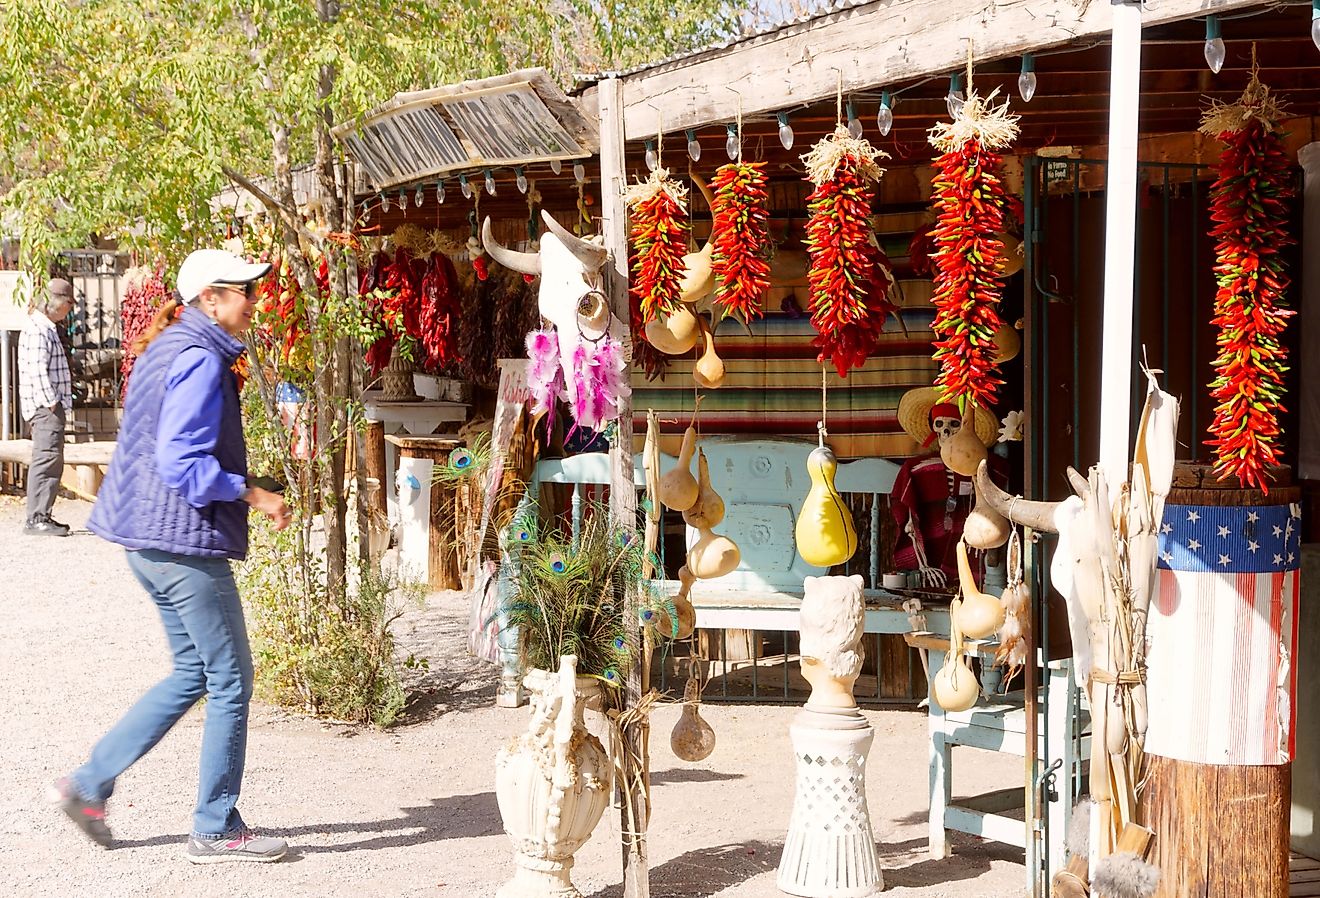 Tourist looking at the ristras hanging in front of a store in Mesilla, New Mexico. Image credit Grossinger via Shutterstock.